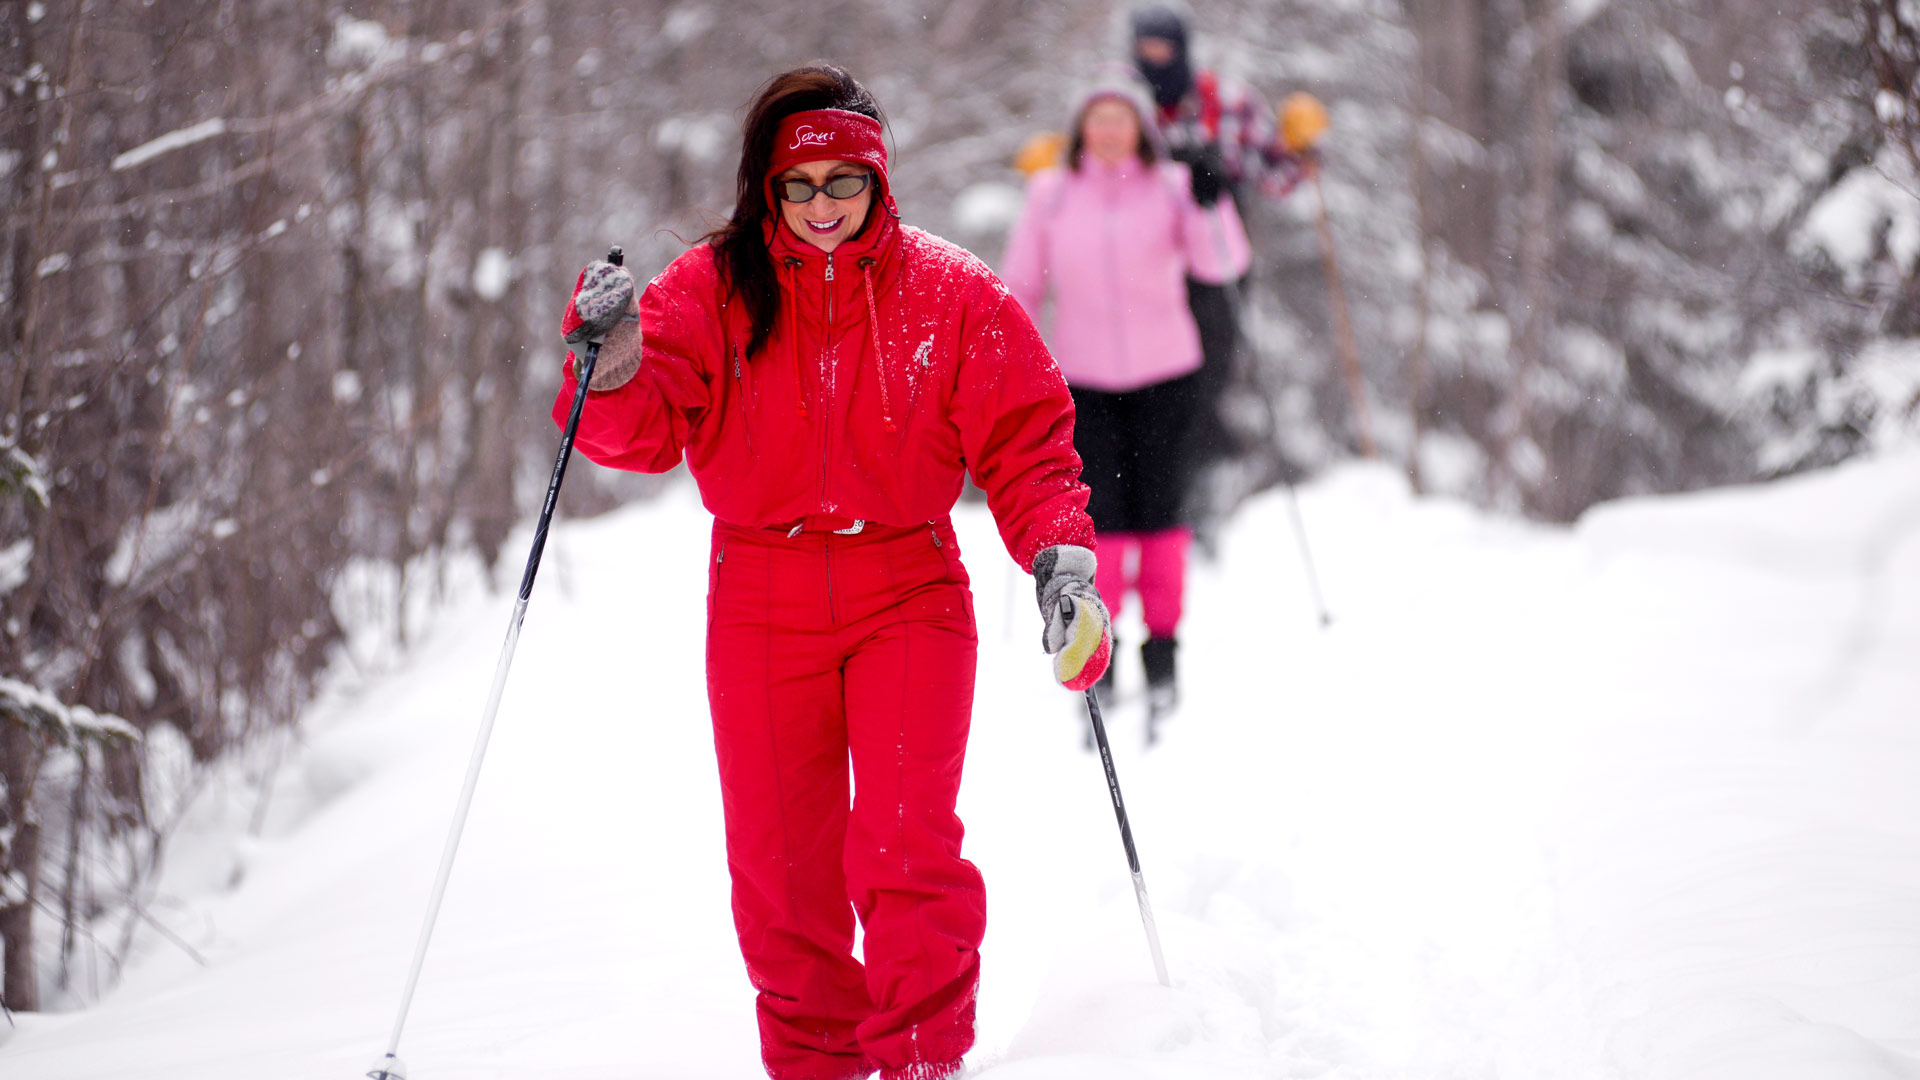 Cross-country skiing on a snowy forest trail